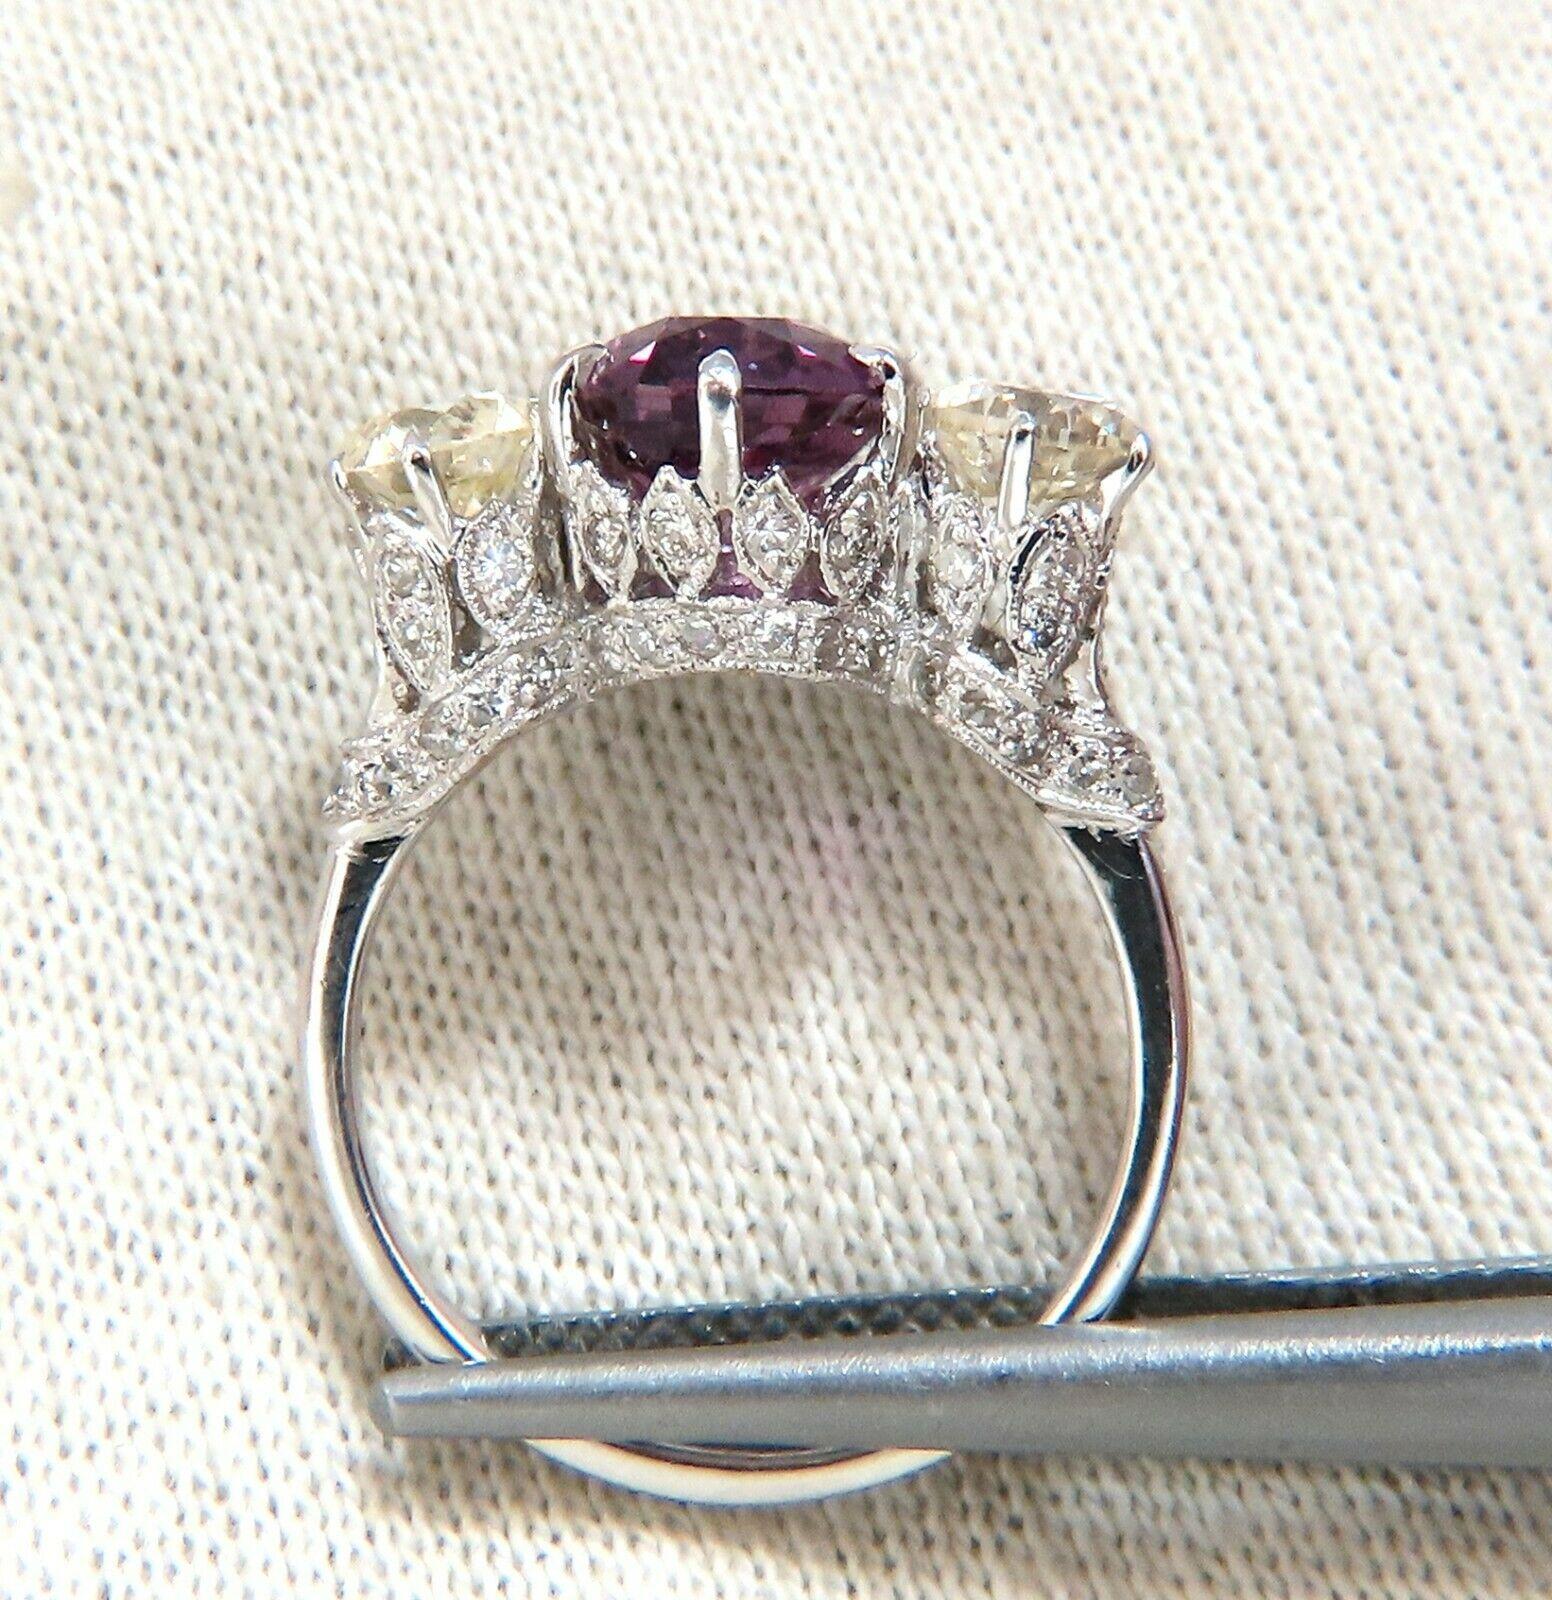 Classic Three Anniversary 

European Inspired Mod

3.37ct. Natural GIA Certified Purple-Pink Sapphire Ring

GIA Certified Report ID: 6207133532

9.82 X 7.39 X 4.92mm

Full cut cushion brilliant 

Clean Clarity & Transparent

Standard Heat Treated,